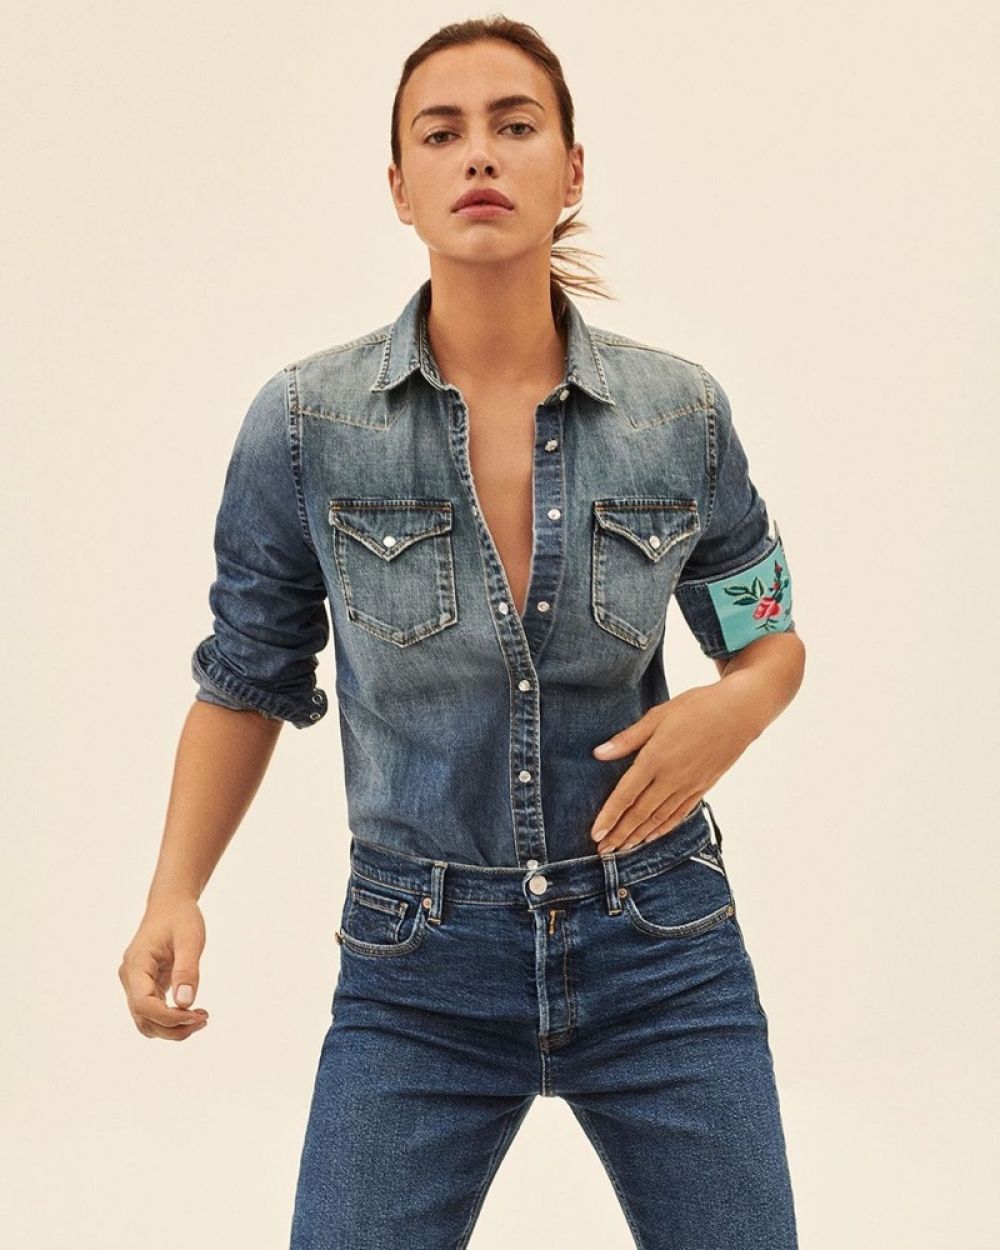 Irina Shayk For Replay Rose Label Fall Winter 2021 Collection